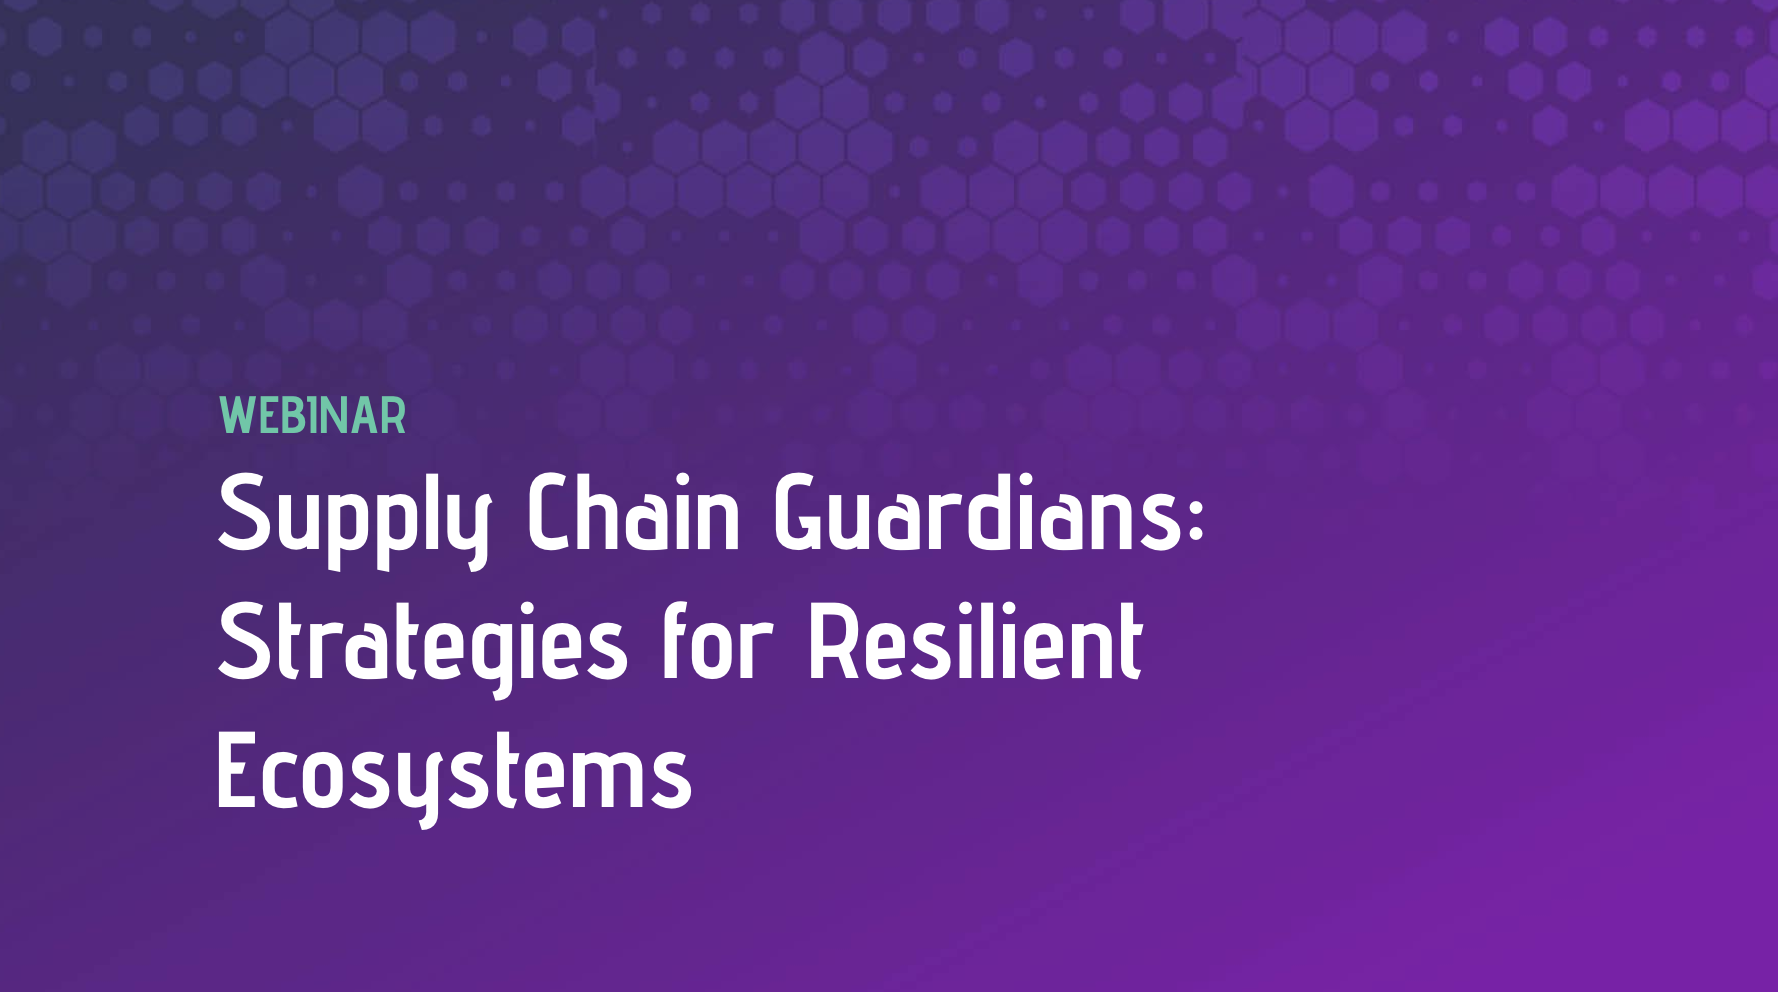 Supply Chain Guardians: Strategies for Resilient Ecosystems